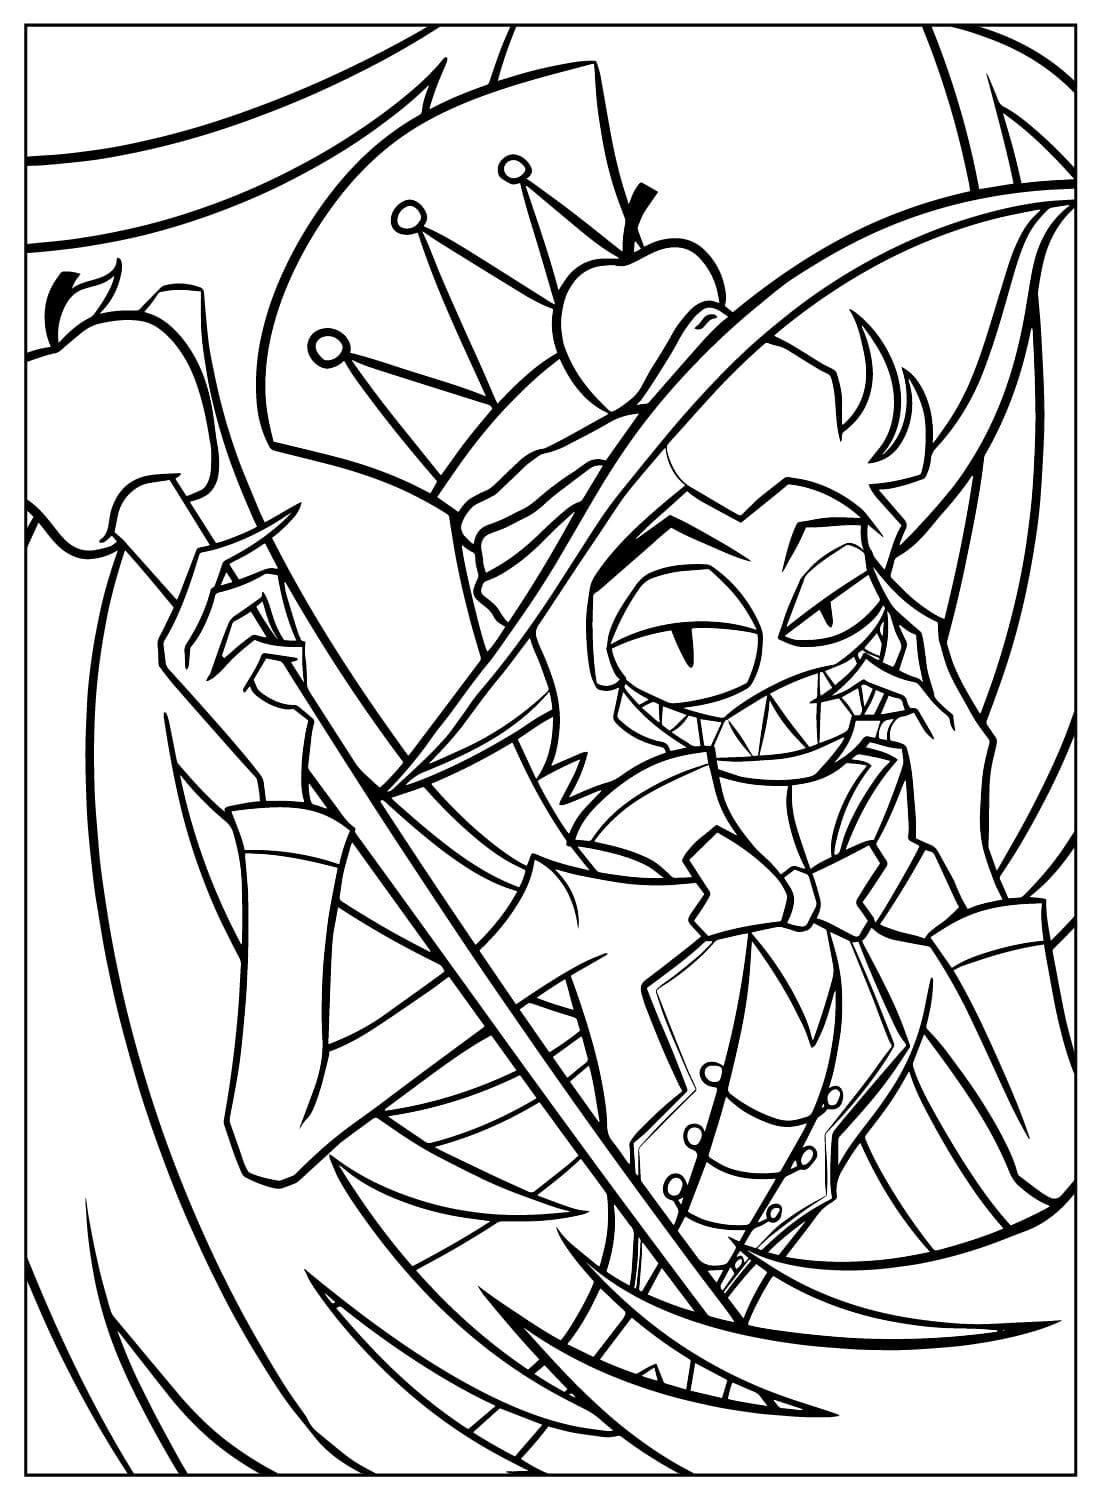 Drawing Lucifer Morningstar Coloring Page from Lucifer Morningstar